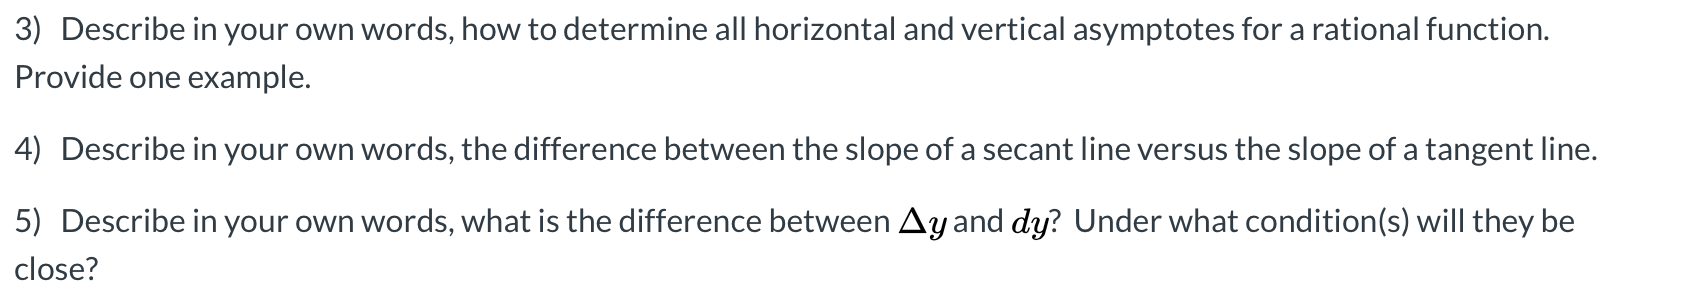 3) Describe in your own words, how to determine all horizontal and vertical asymptotes for a rational function.
Provide one example.
